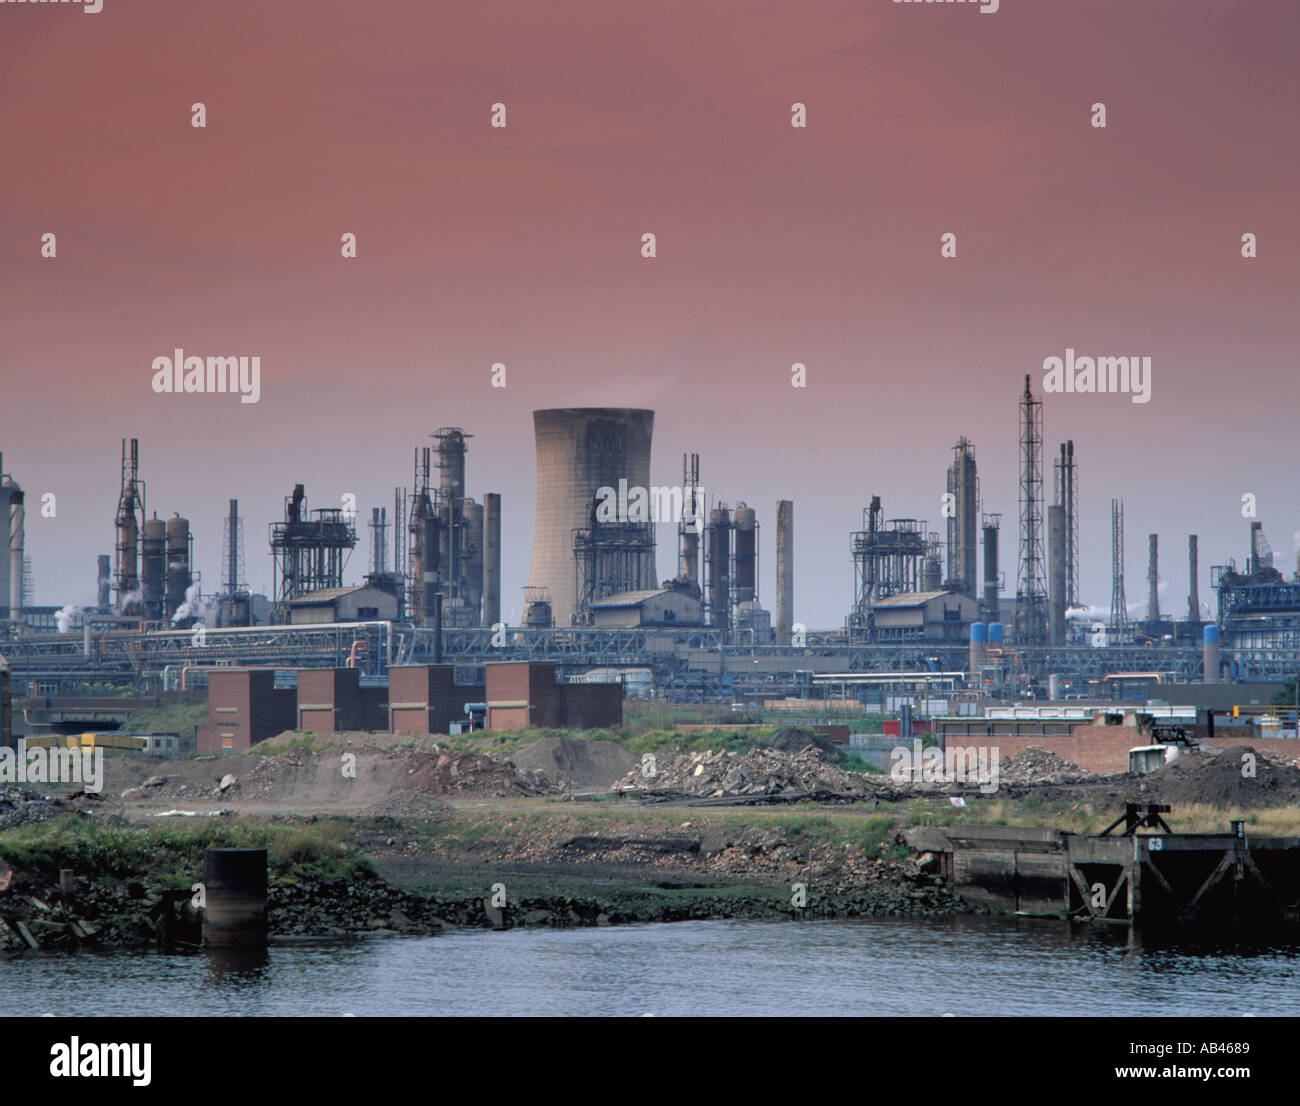 Chemical complex and cooling tower seen over River Tees and derelict land, Billingham, Teesside, Cleveland, England, UK. in the 1980s Stock Photo